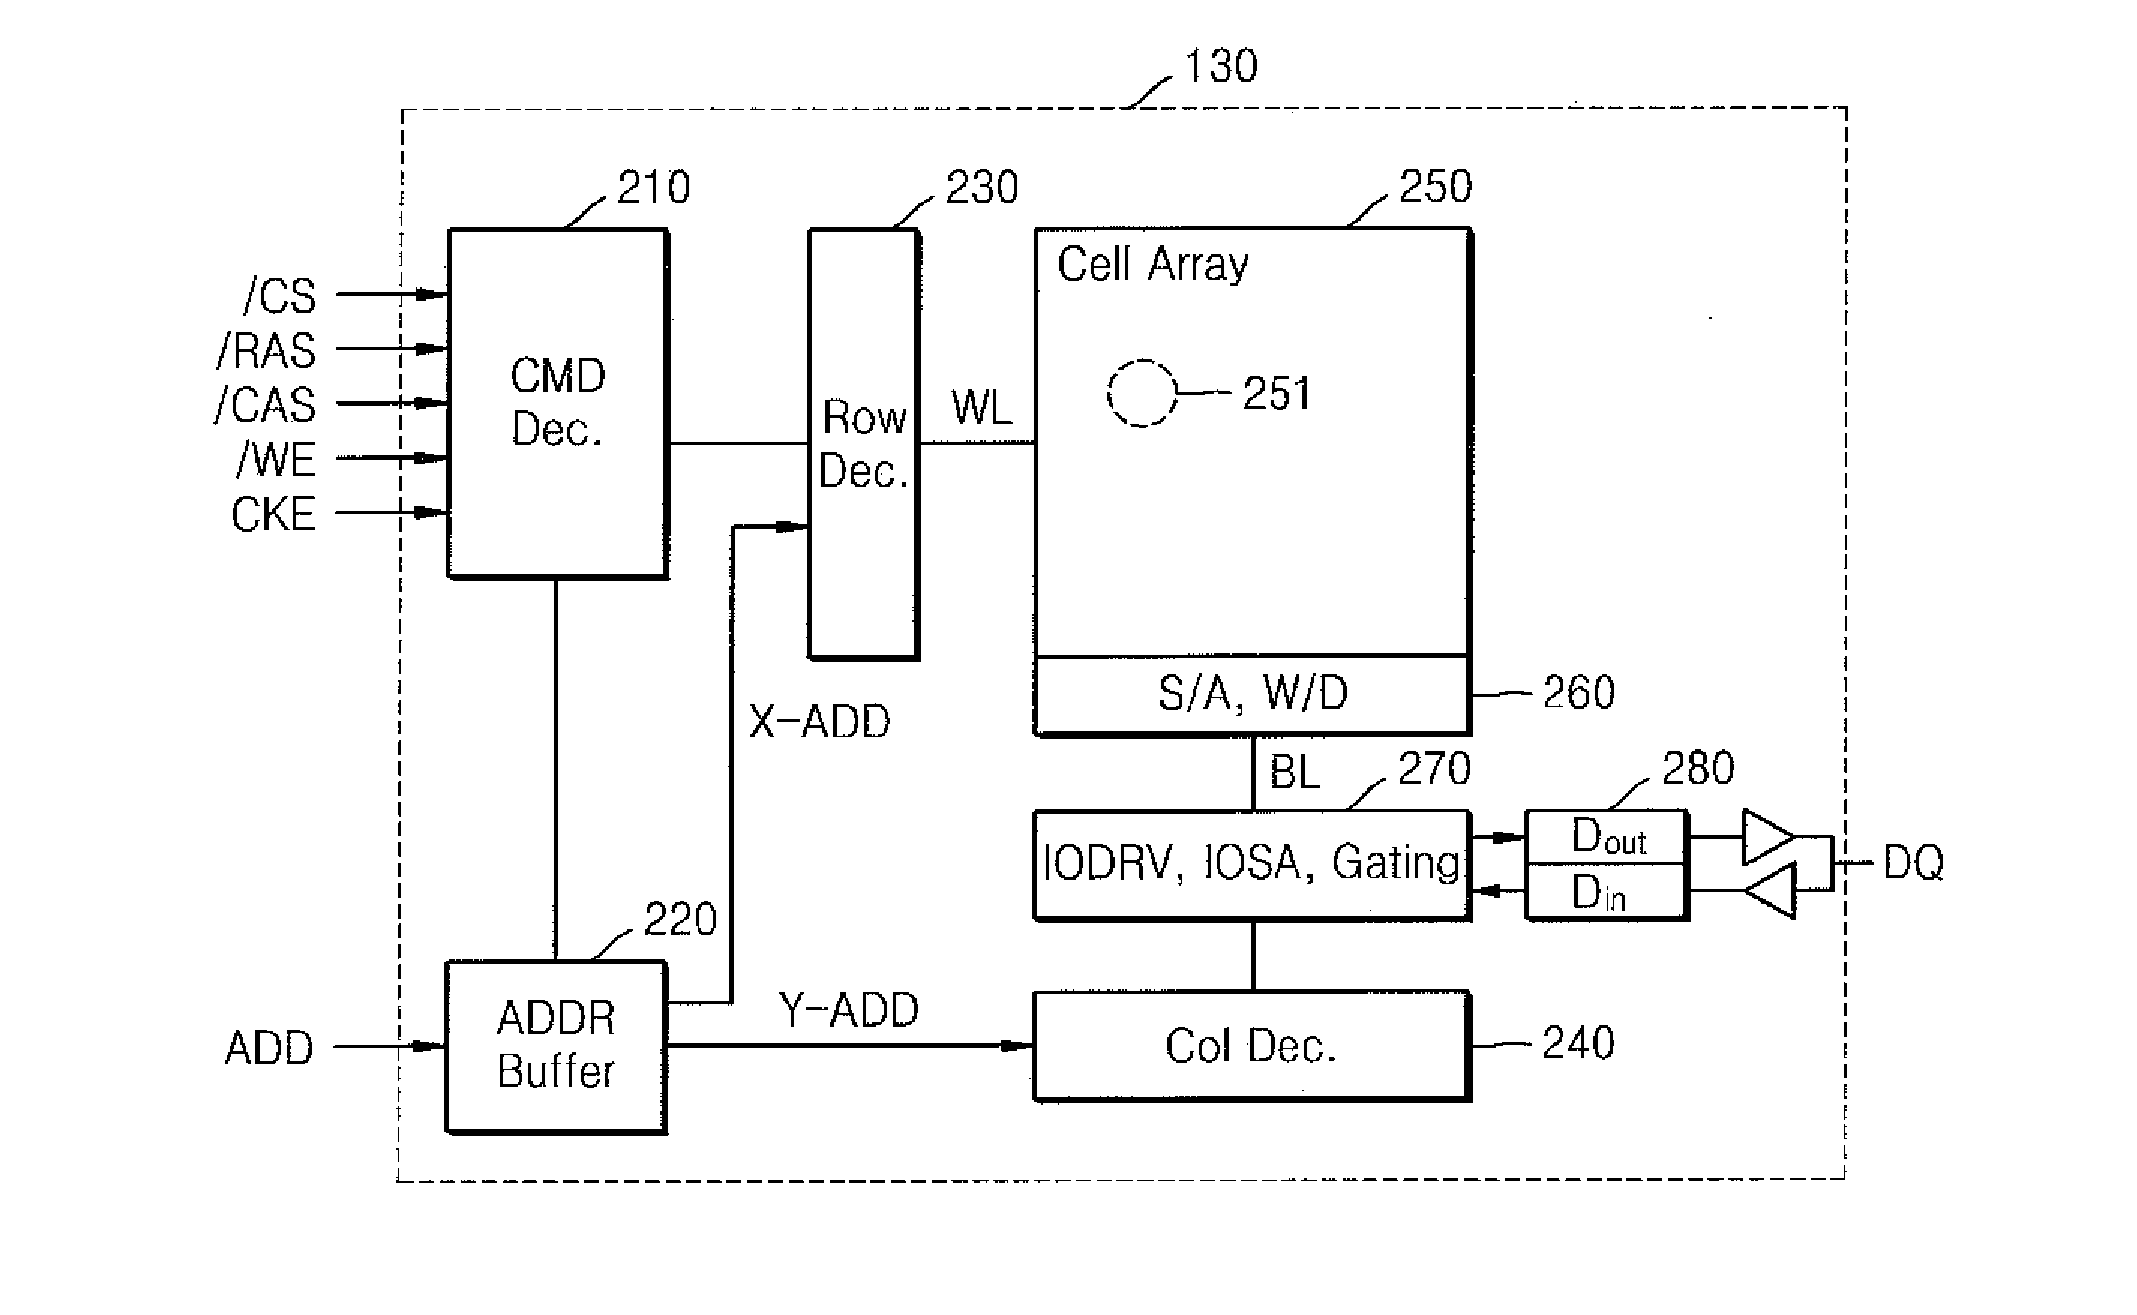 Computer system having non-volatile memory and method of operating the computer system